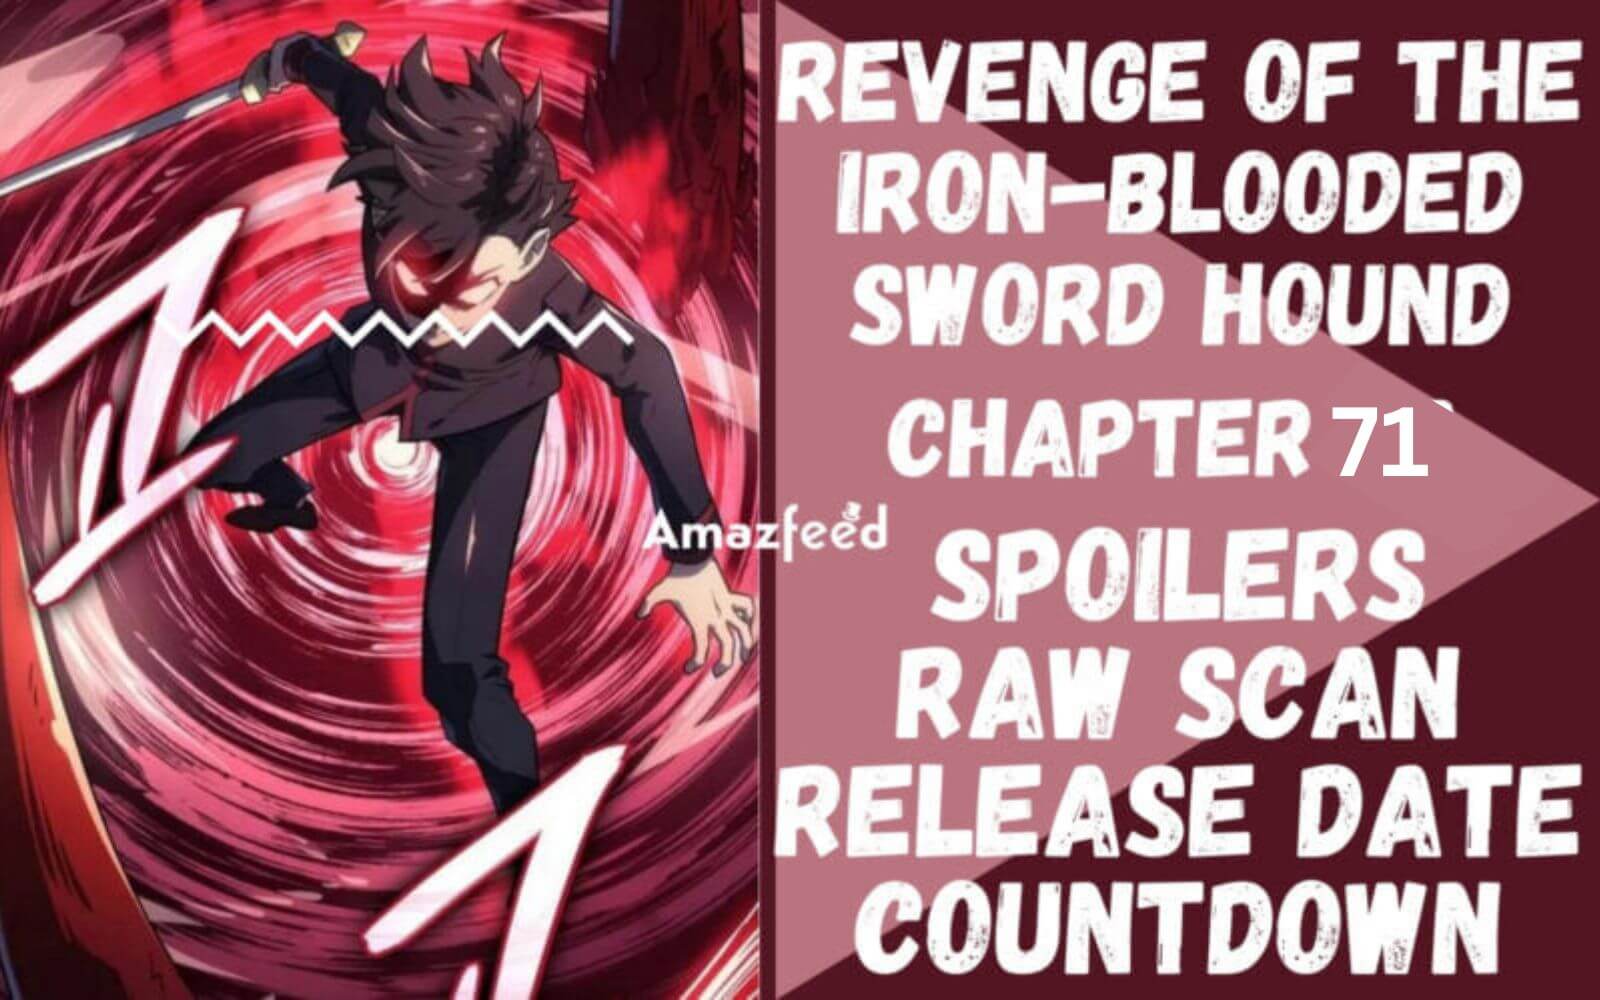 Revenge of the Iron-Blooded Sword Hound Chapter 71